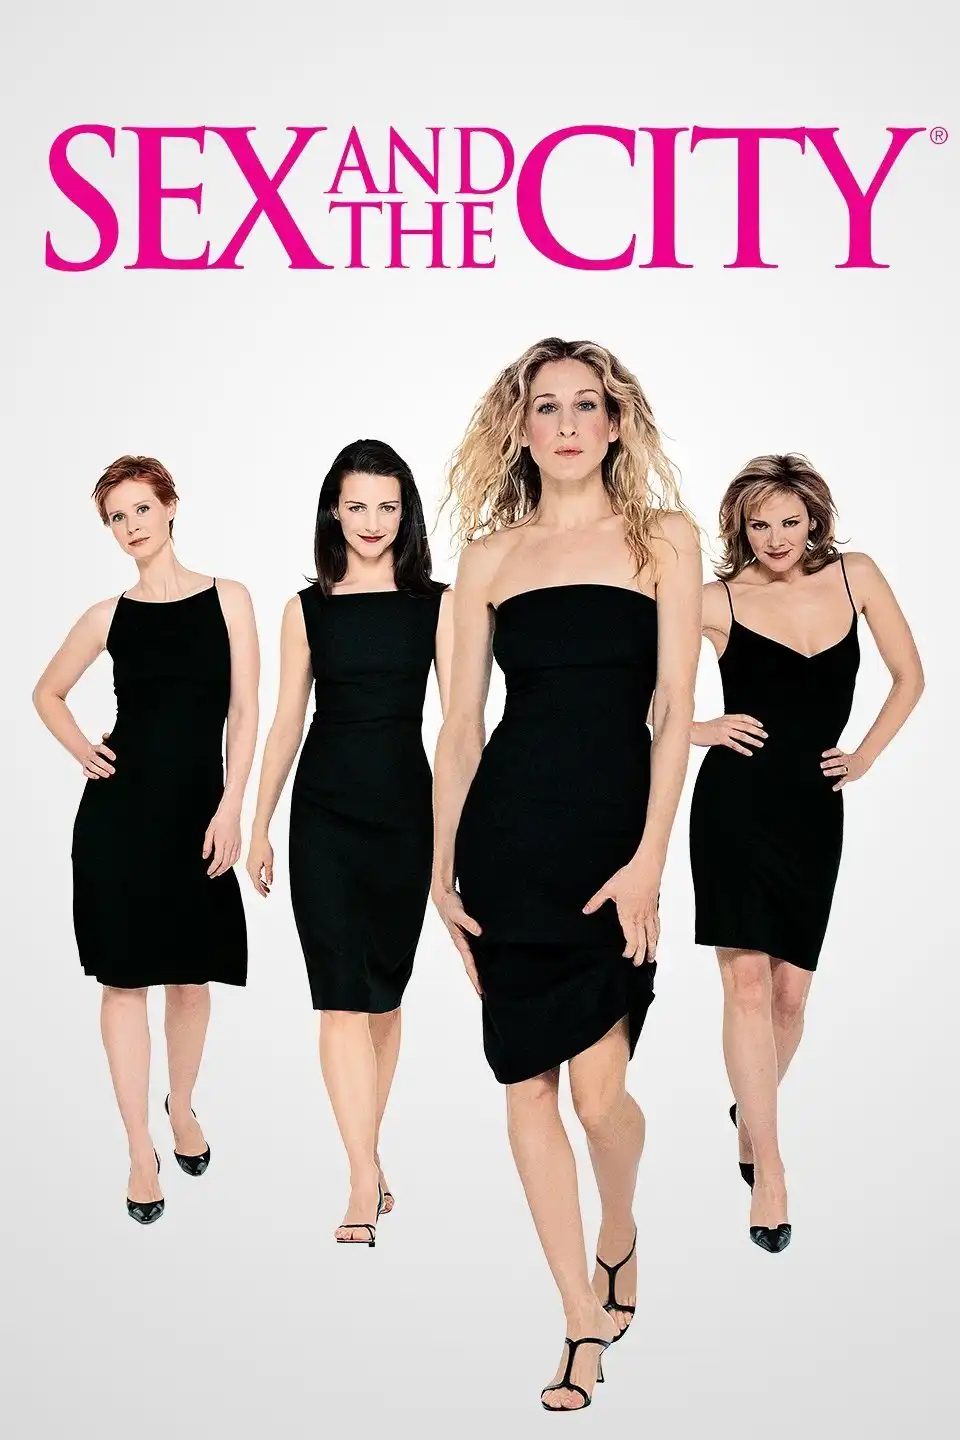 Sex and the city (Integrale) FRENCH HDTV